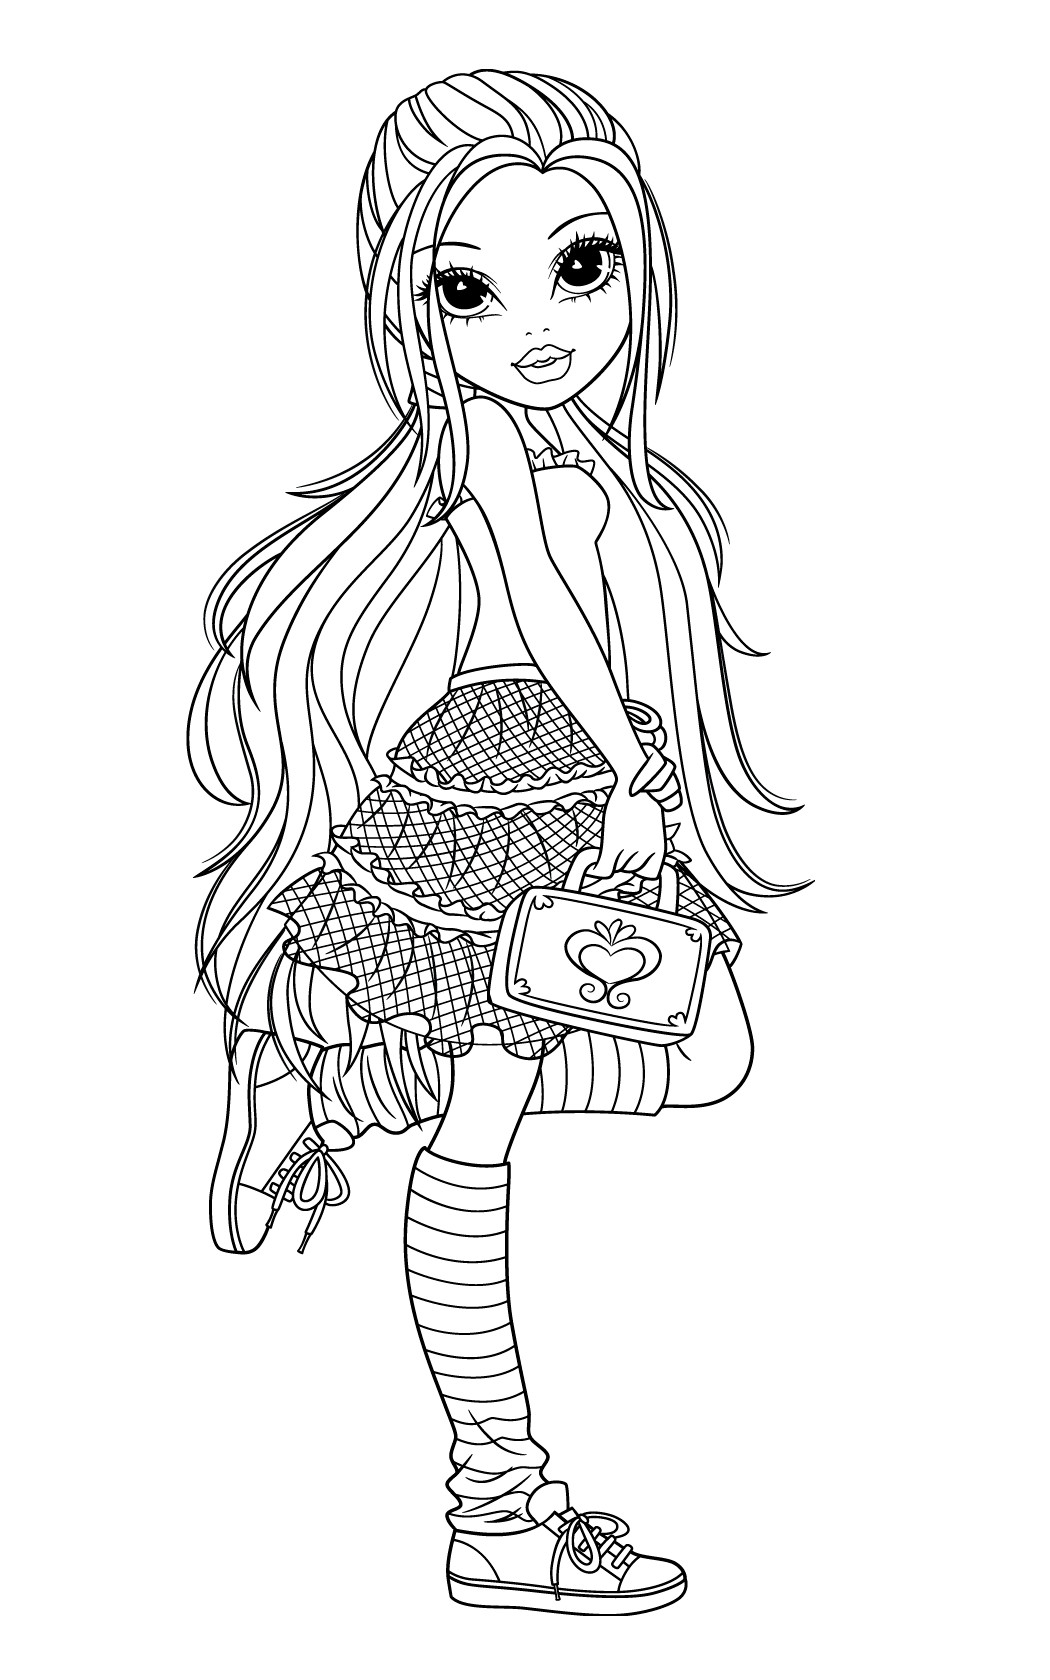 Coloring Pages For Girl Printable
 New Moxie Girlz Coloring Pages will be added frequently so